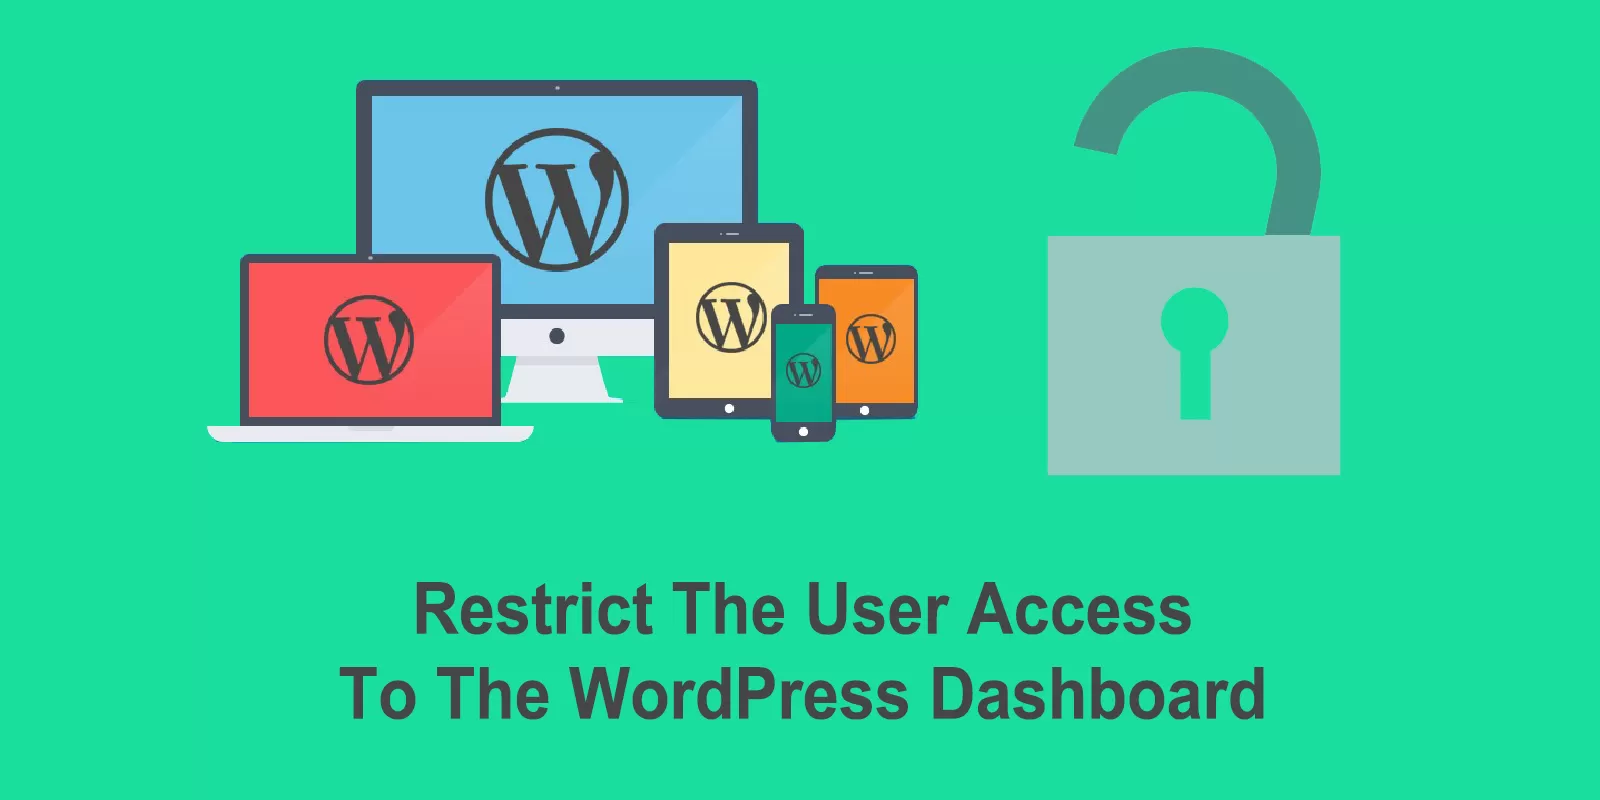 Restrict users access to dashboard